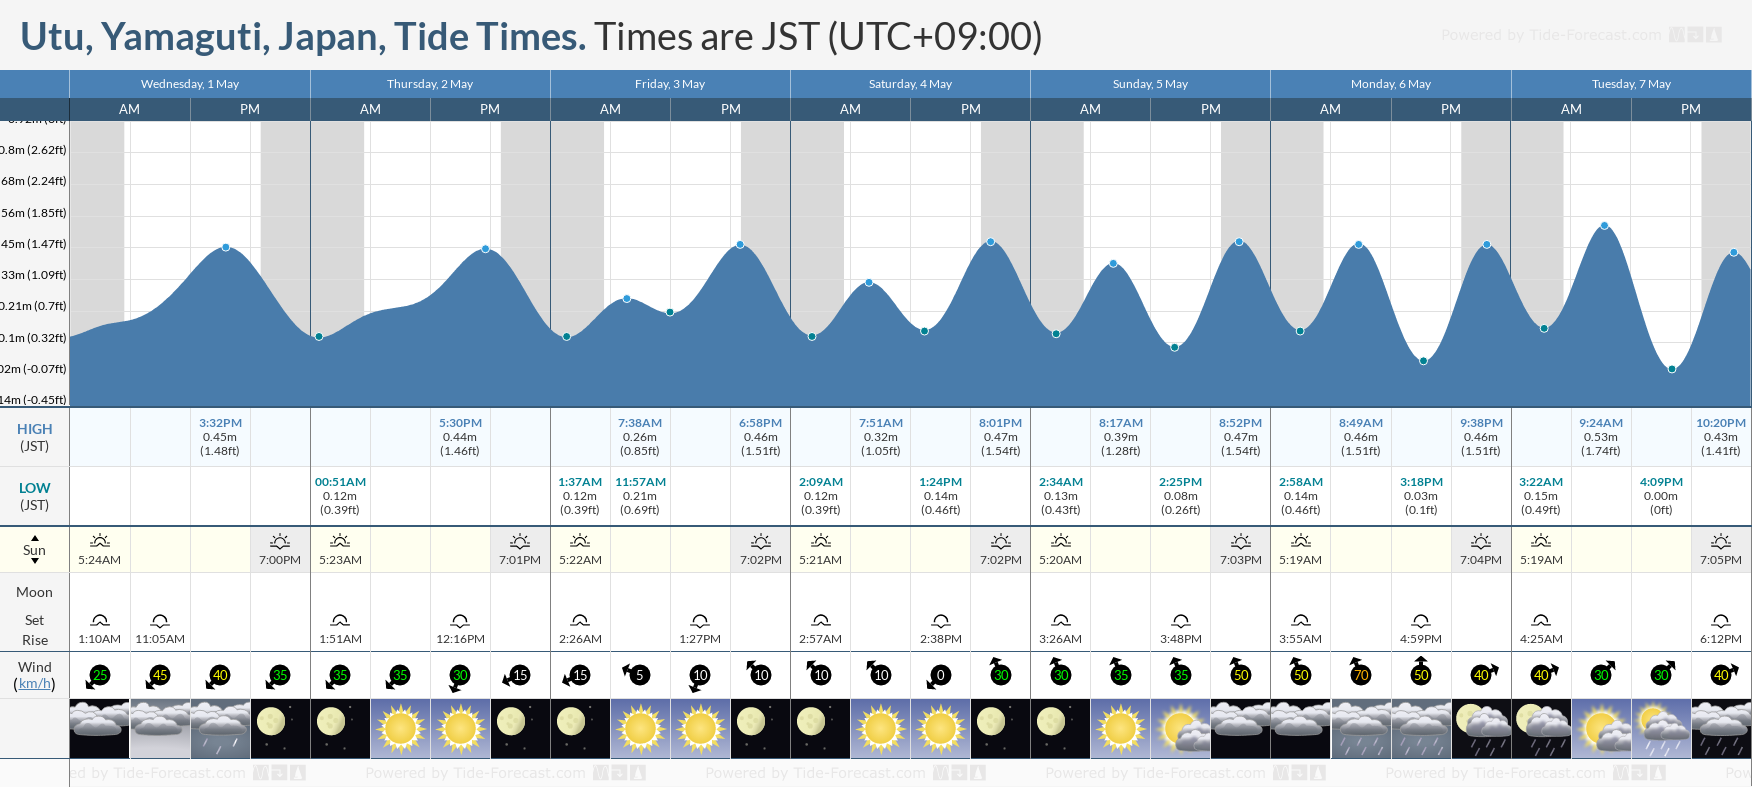 Utu, Yamaguti, Japan Tide Chart including high and low tide tide times for the next 7 days